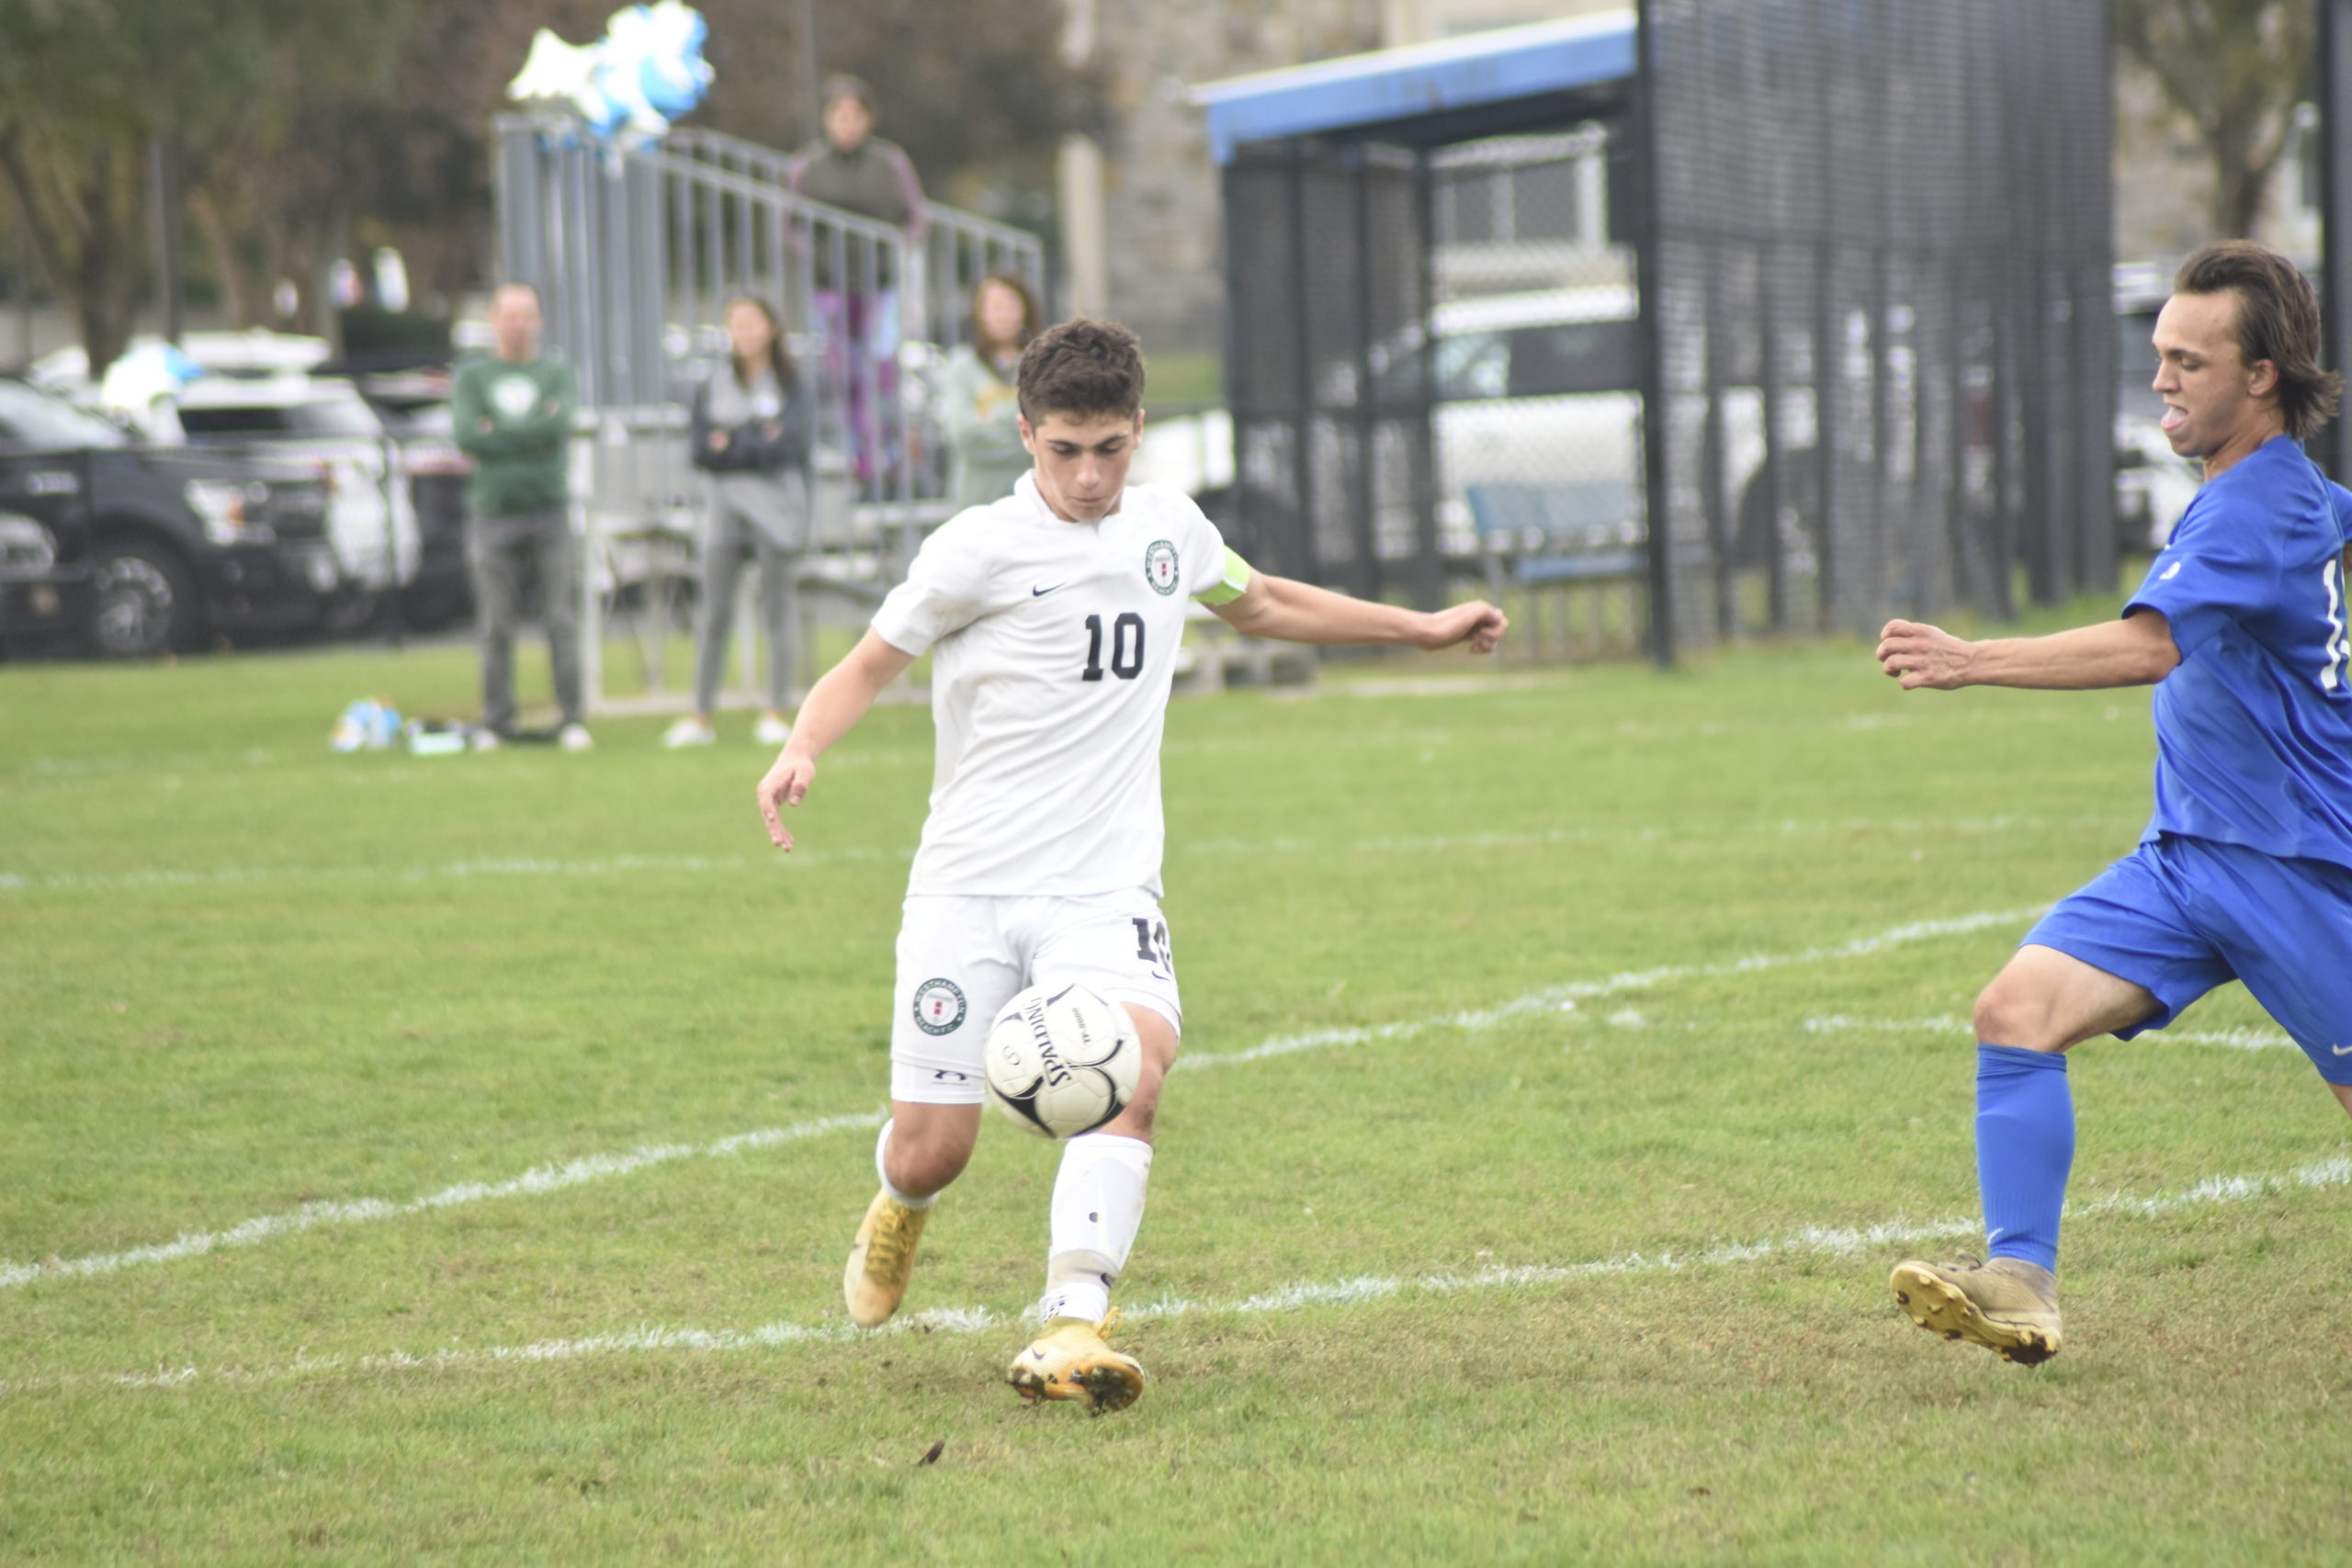 Westhampton Beach senior co-captain Loris Van Vlodrop clears the ball out of his team's defensive end.